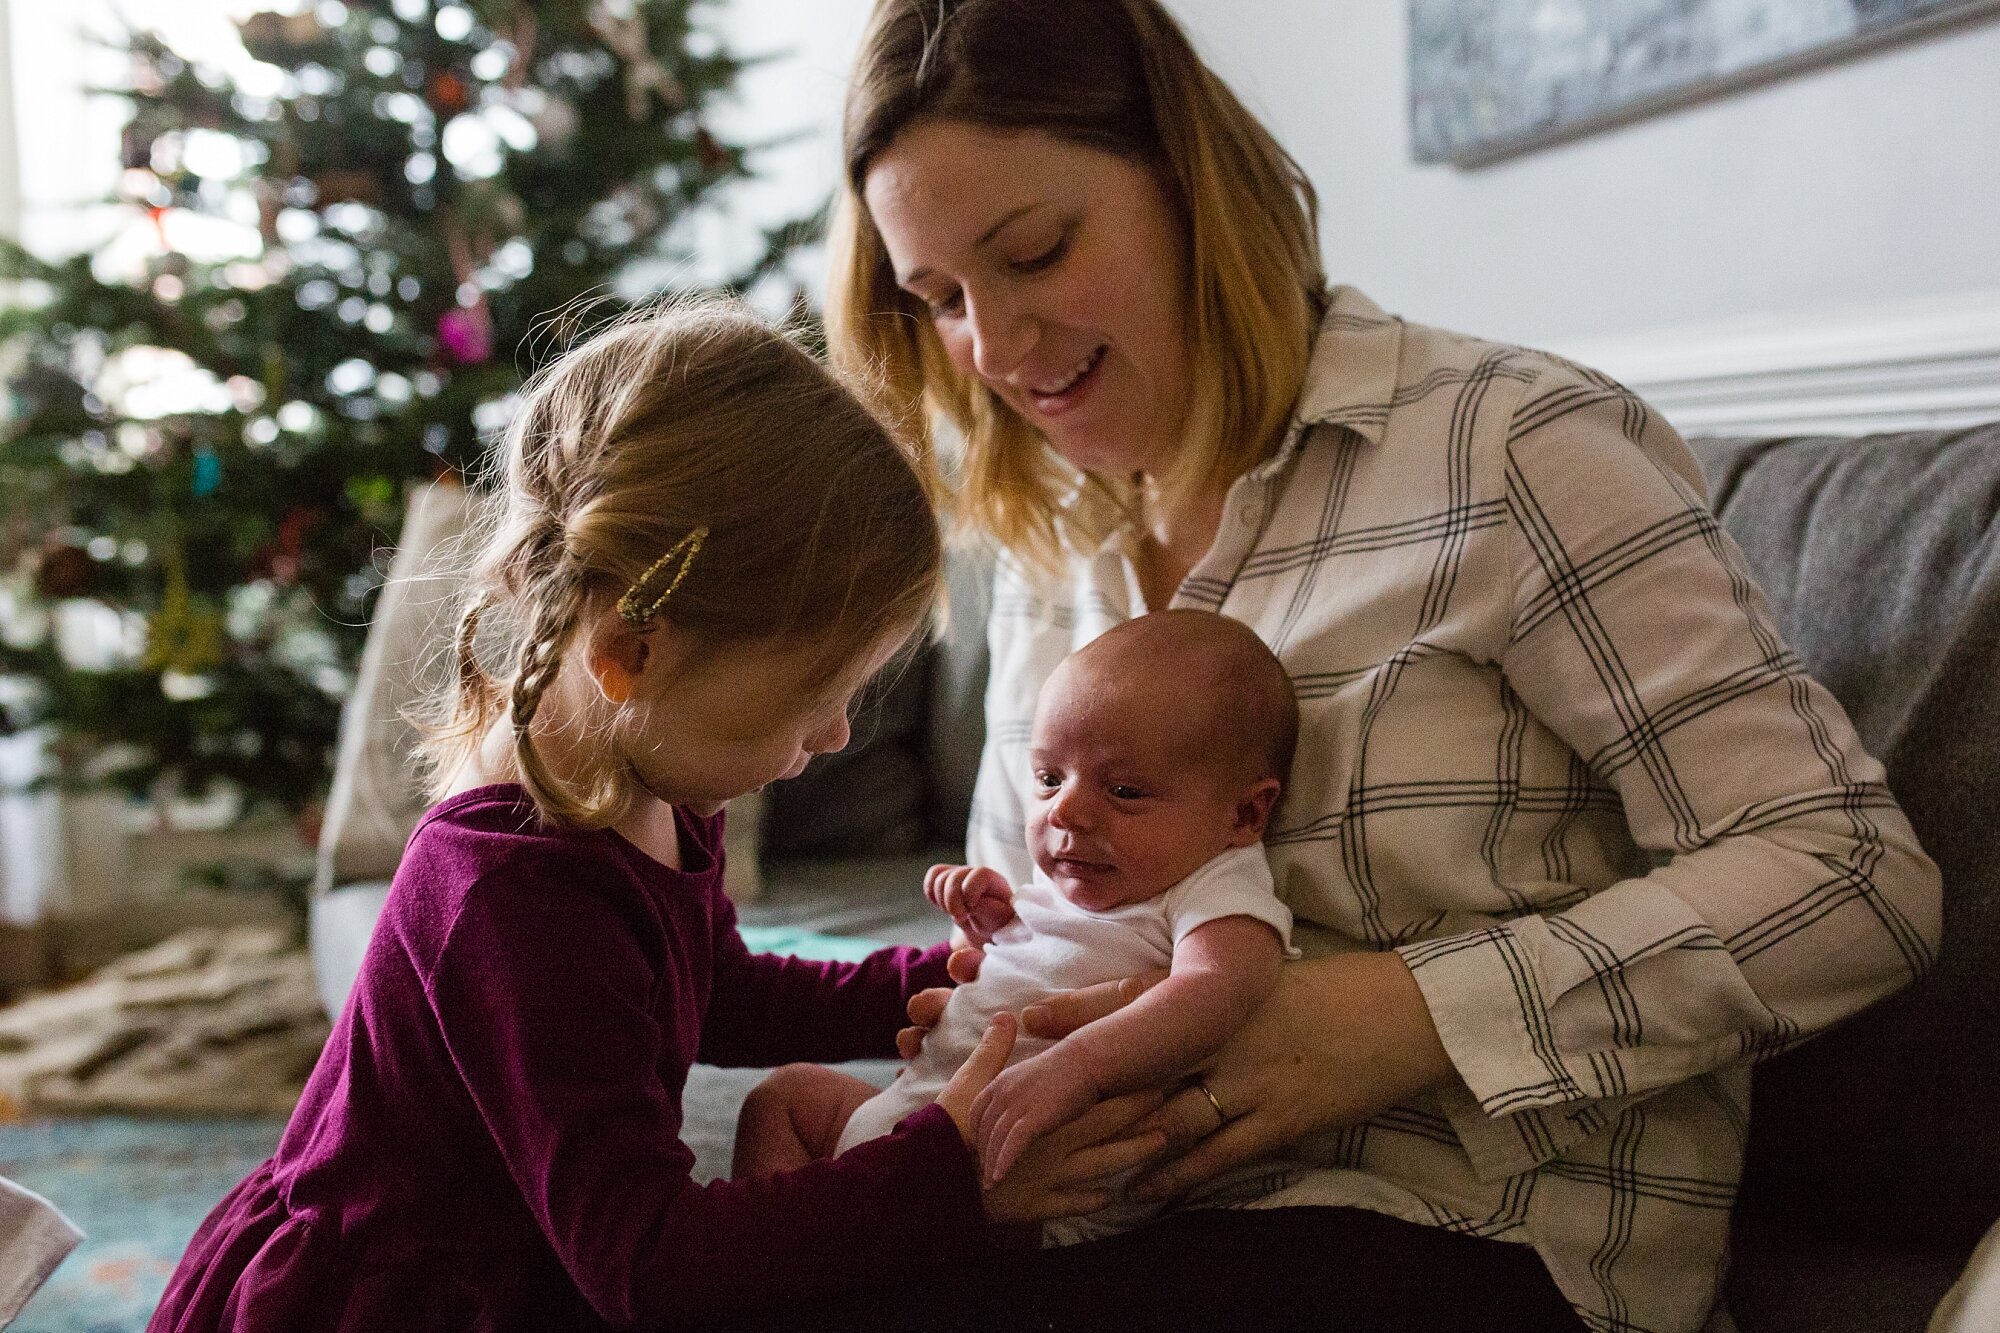 Big sister sibling comes over to say hi to baby brother sitting in mom's lap, Christmas tree in the background, Philadelphia newborn photography